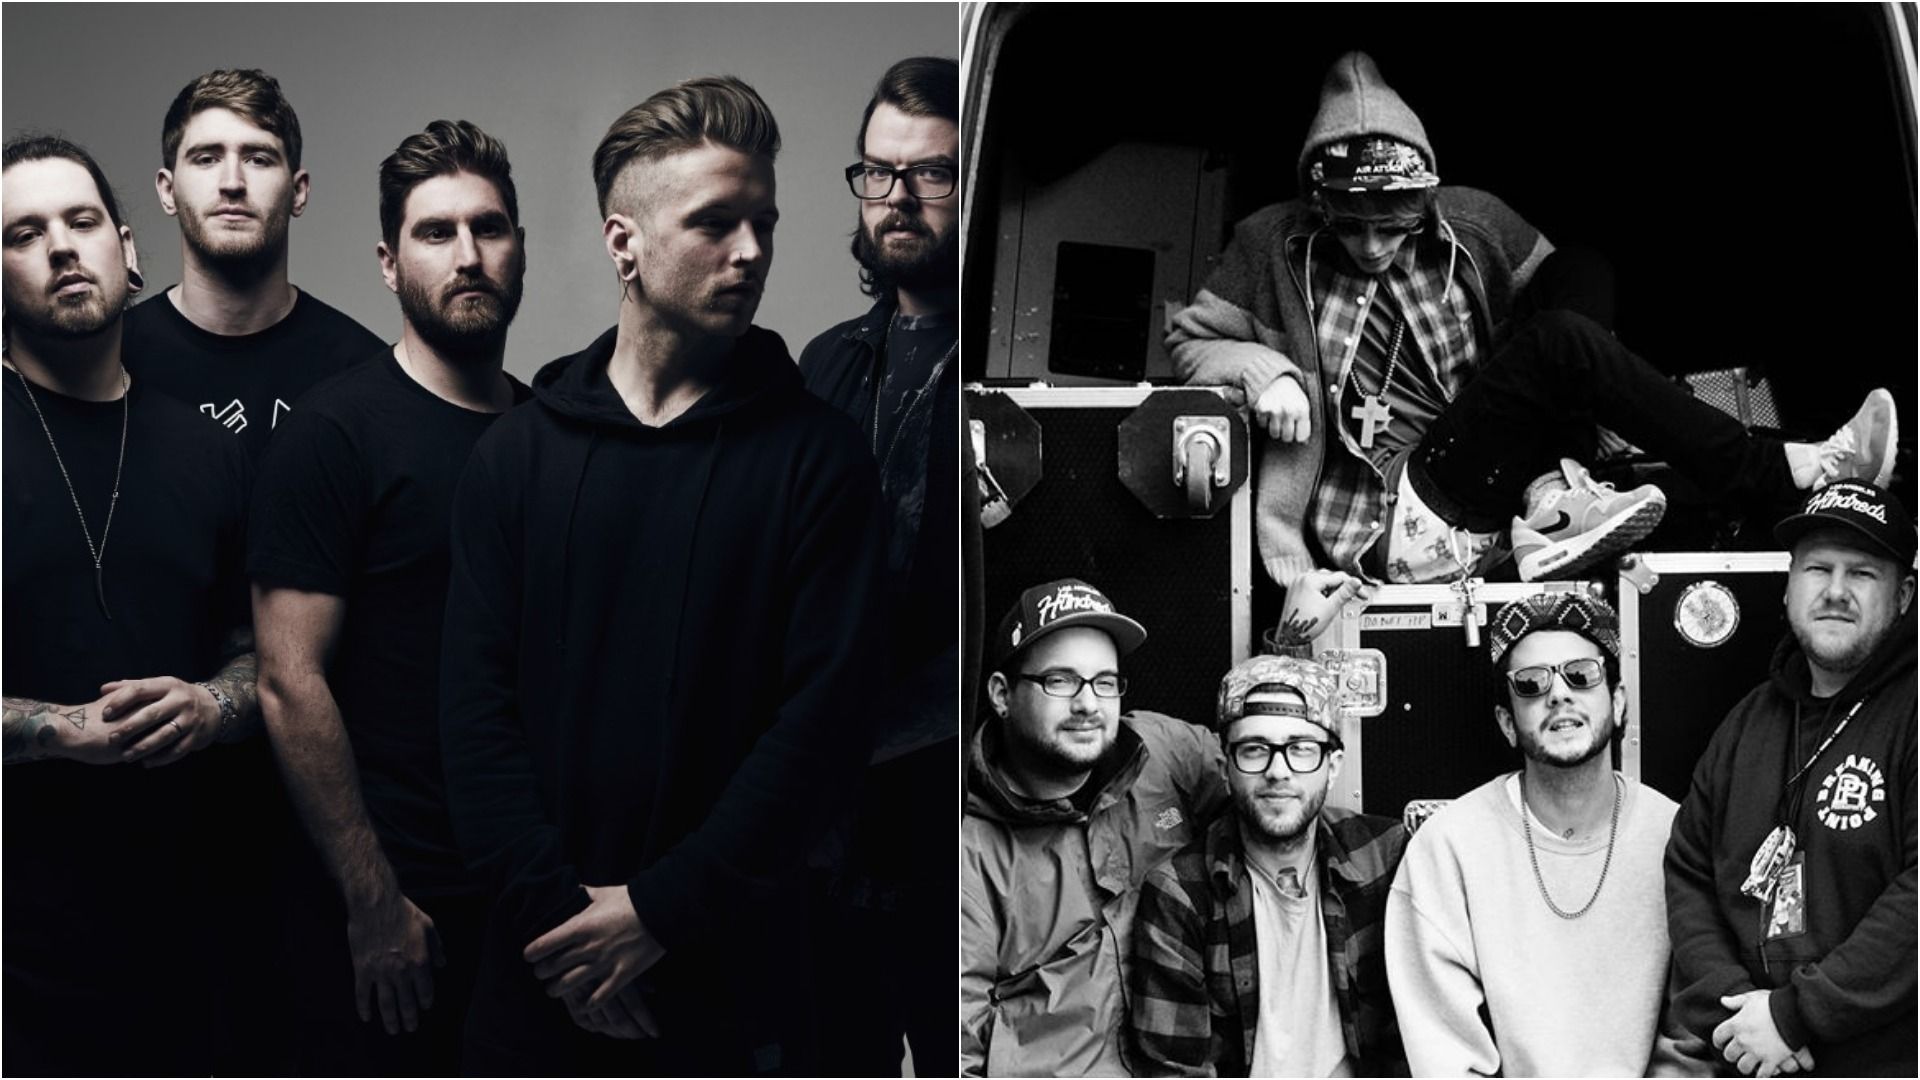 NEWS: Bury Tomorrow & Your Demise pull out of Slam Dunk Festival 2020!. DEAD PRESS!. It's more than just music to us